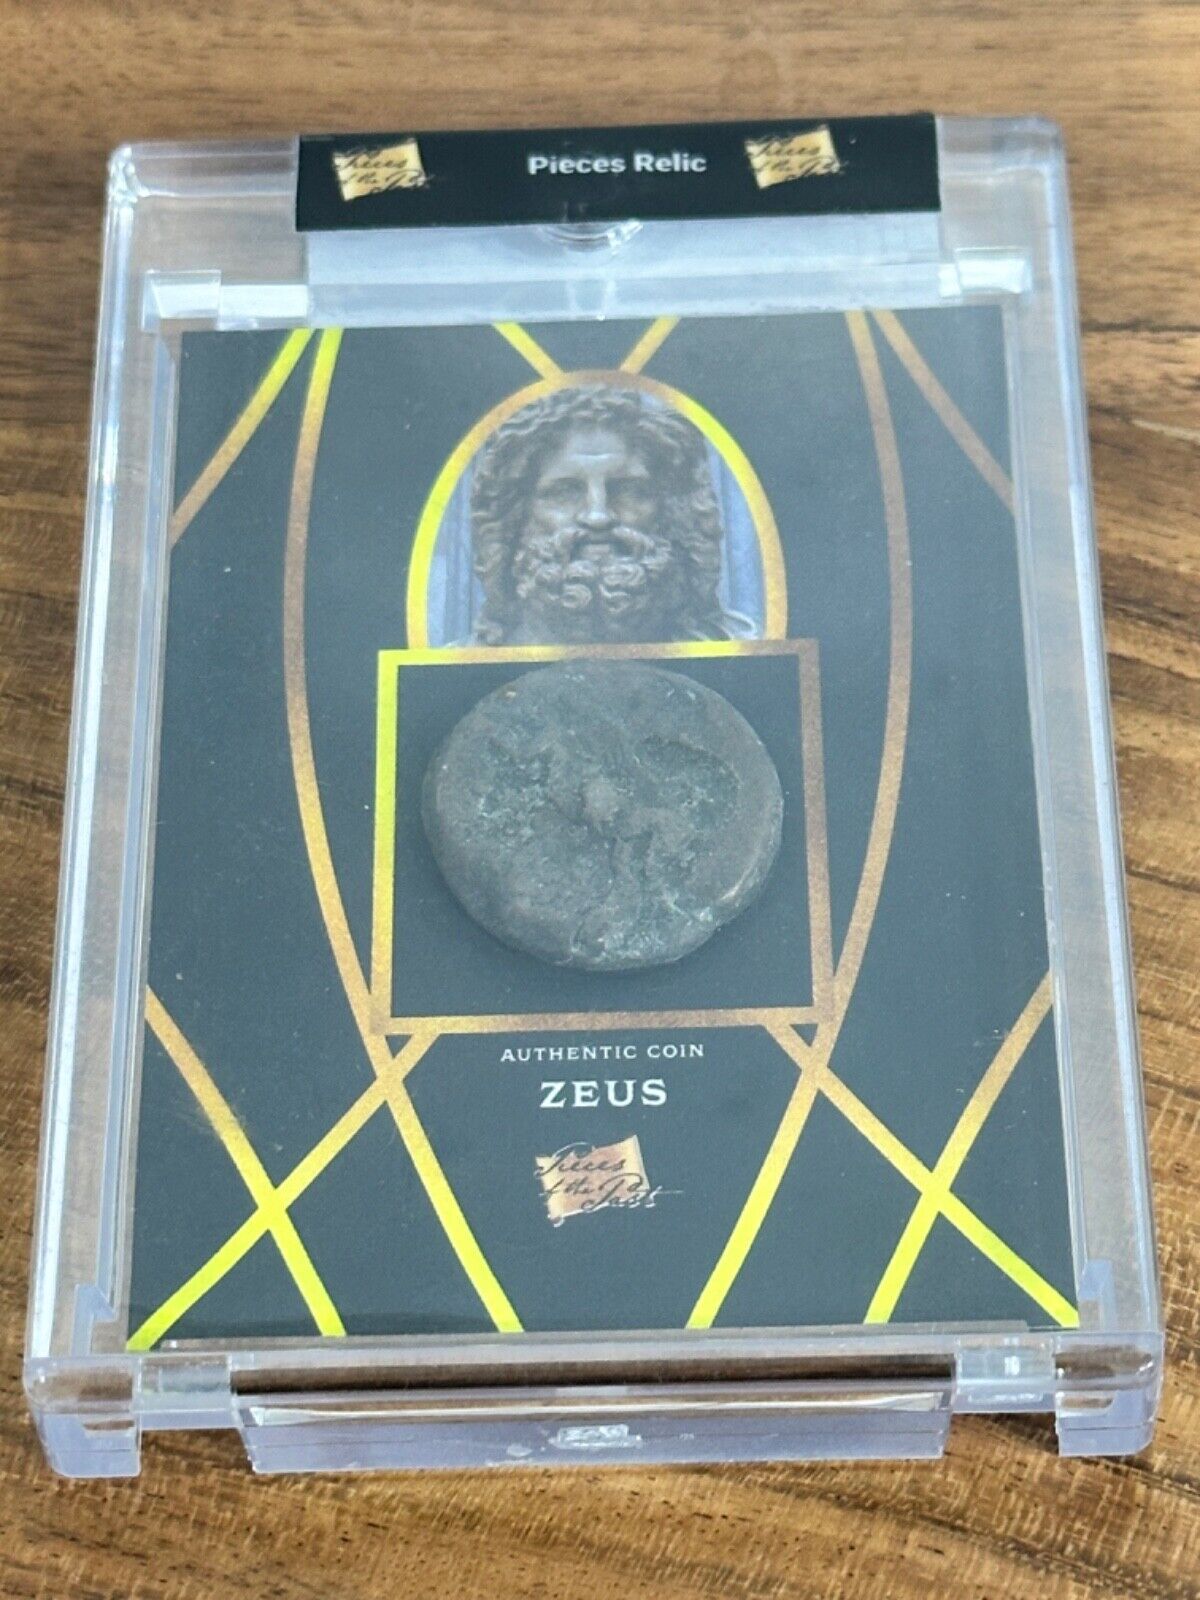 STUNNING XL THOUSAND YR OLD - ZEUS COIN - JUMBO XL RELIC ABSOLUTELY GORGEOUS 1/1